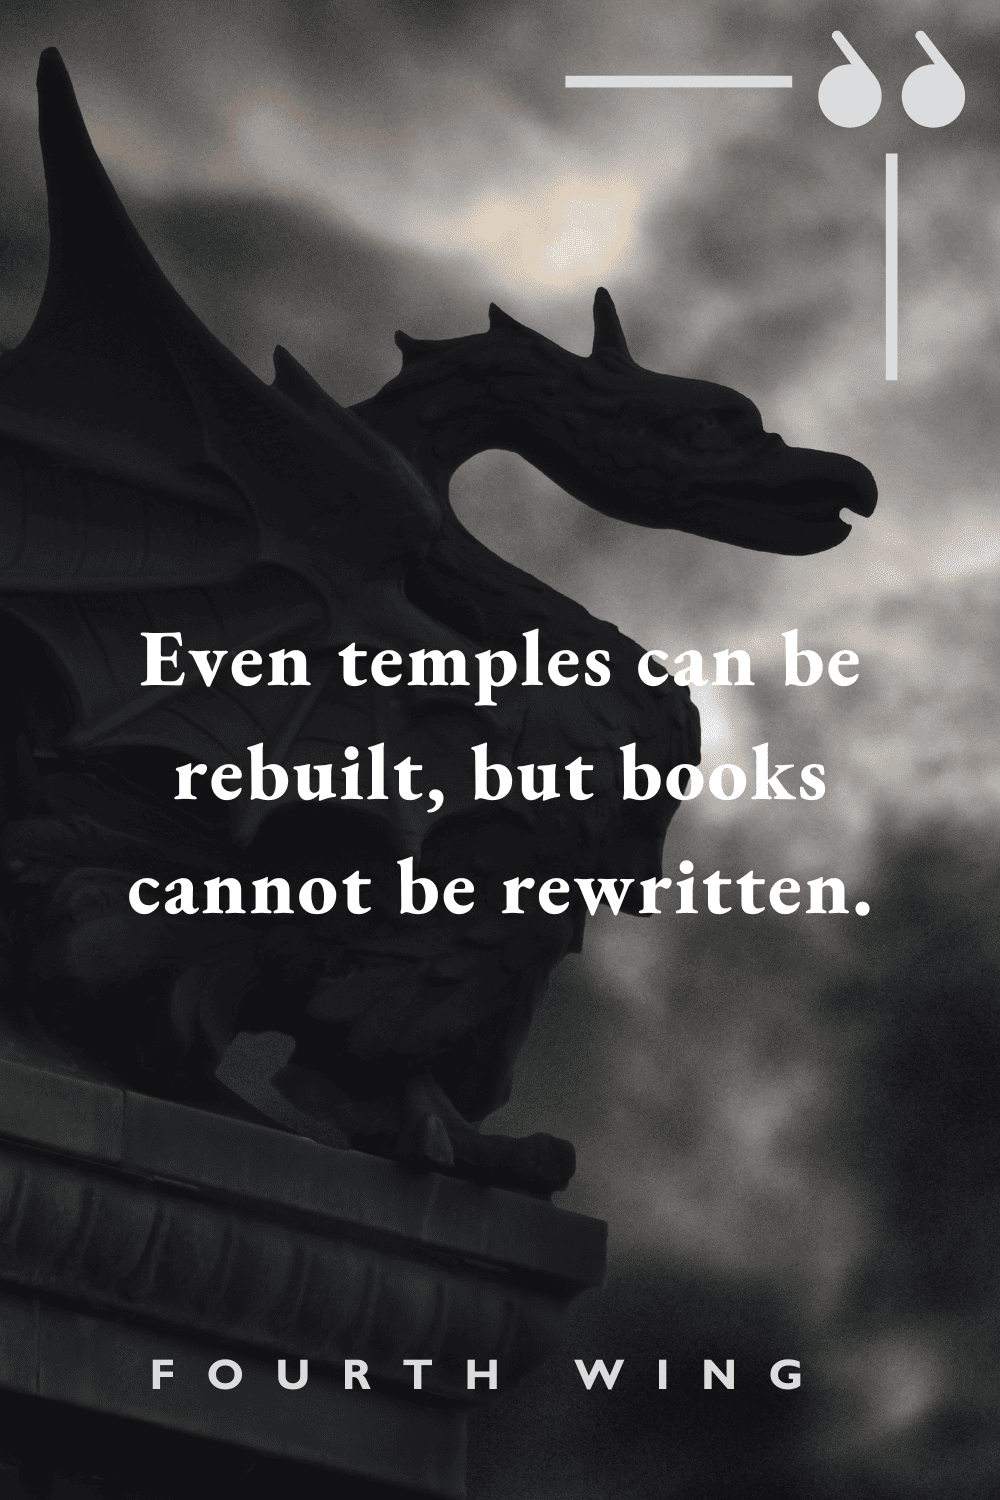 "even temple can be rebuilt, but books cannot be rewritten."